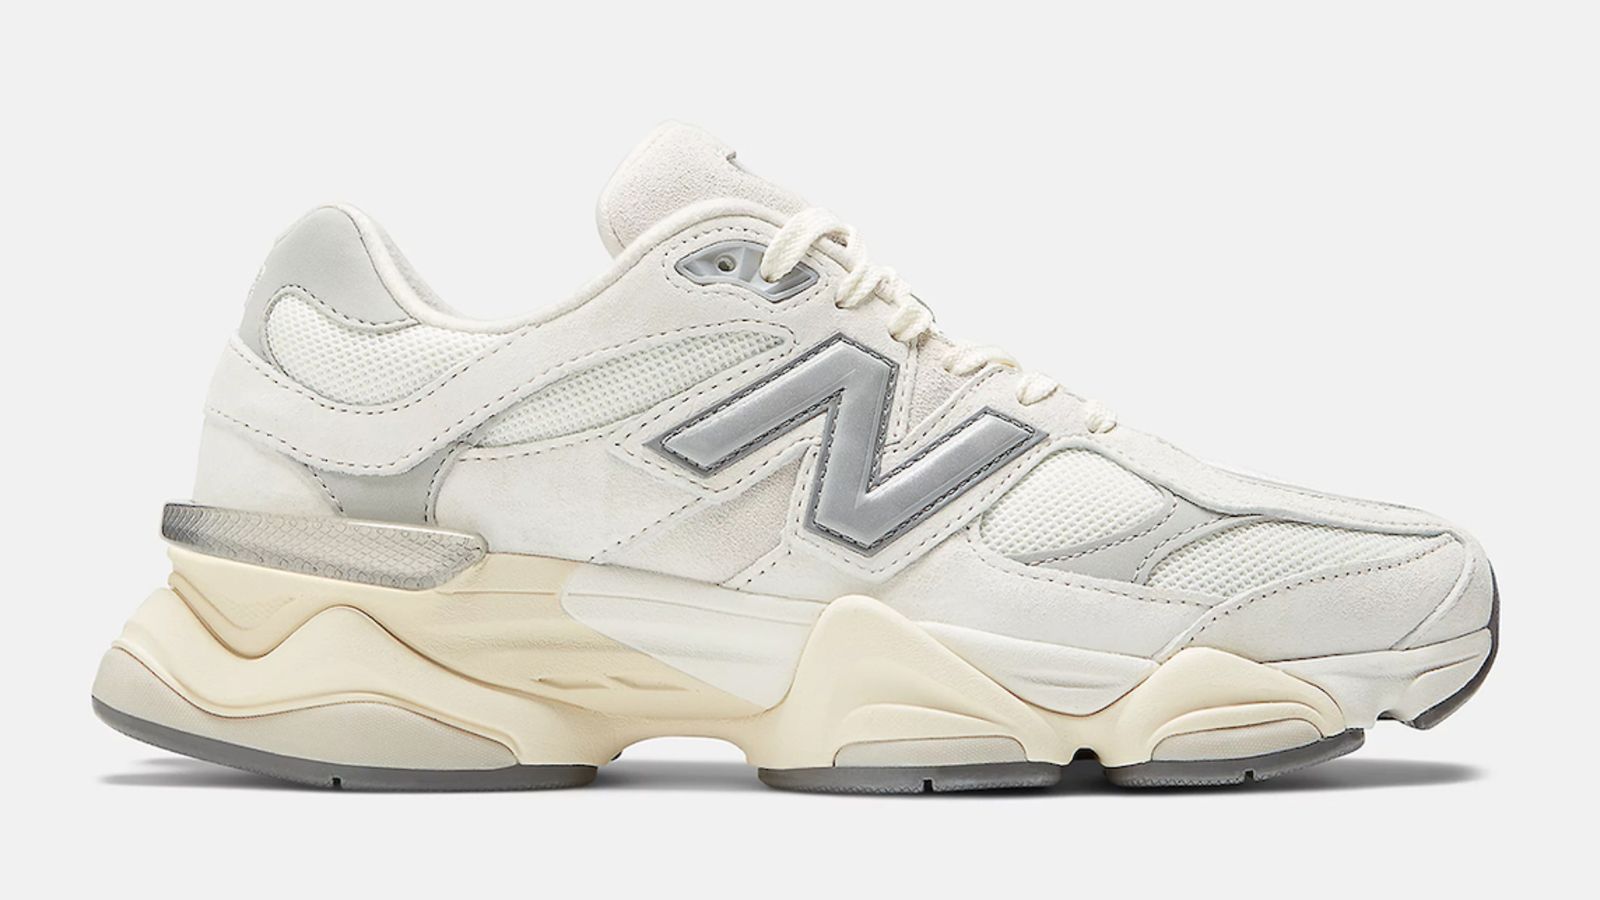 New Balance 9060 "Sea Salt" product image of a white New Balance trainer with a pre-aged midsole and silvery grey accents.